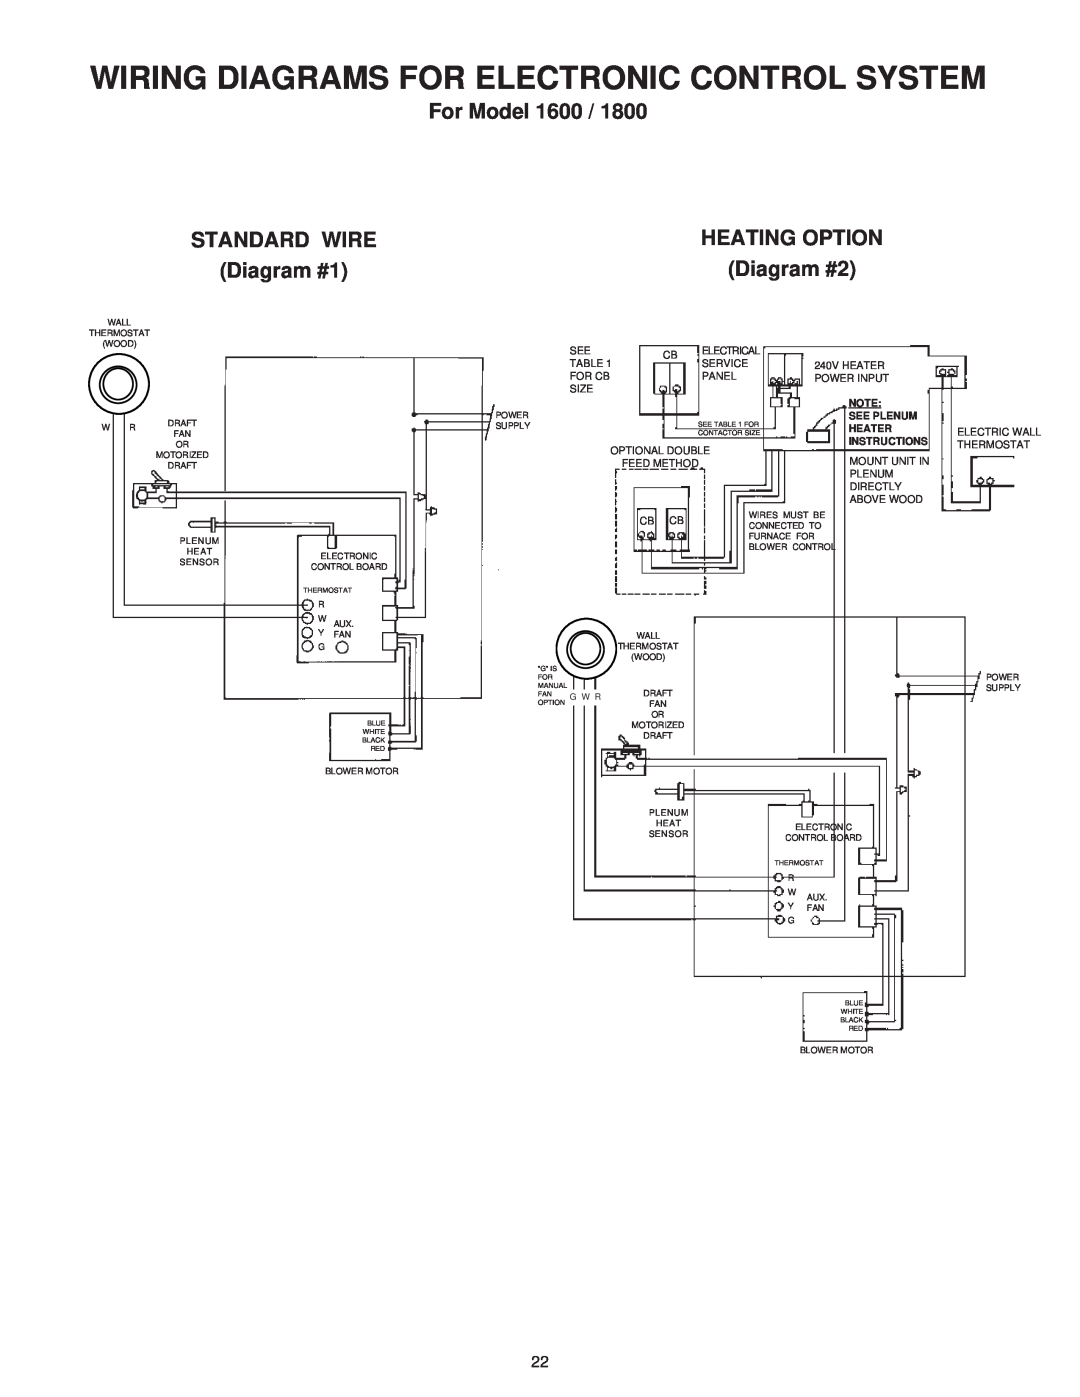 United States Stove 1800 Wiring Diagrams For Electronic Control System, For Model, STANDARD WIRE Diagram #1, See Plenum 